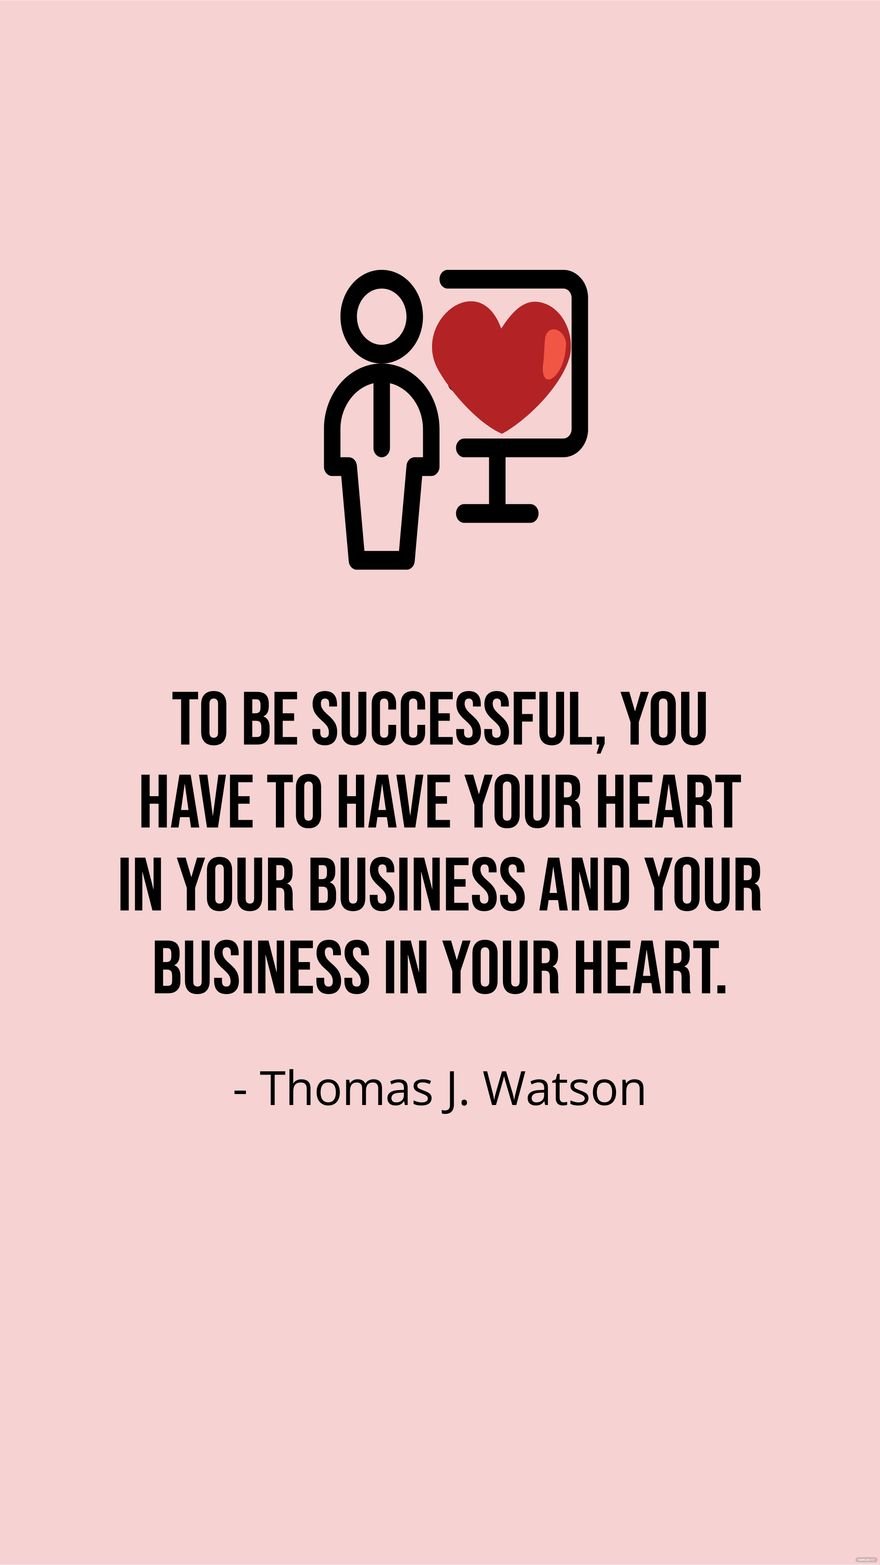 Thomas J. Watson-To be successful, you have to have your heart in your business and your business in your heart.